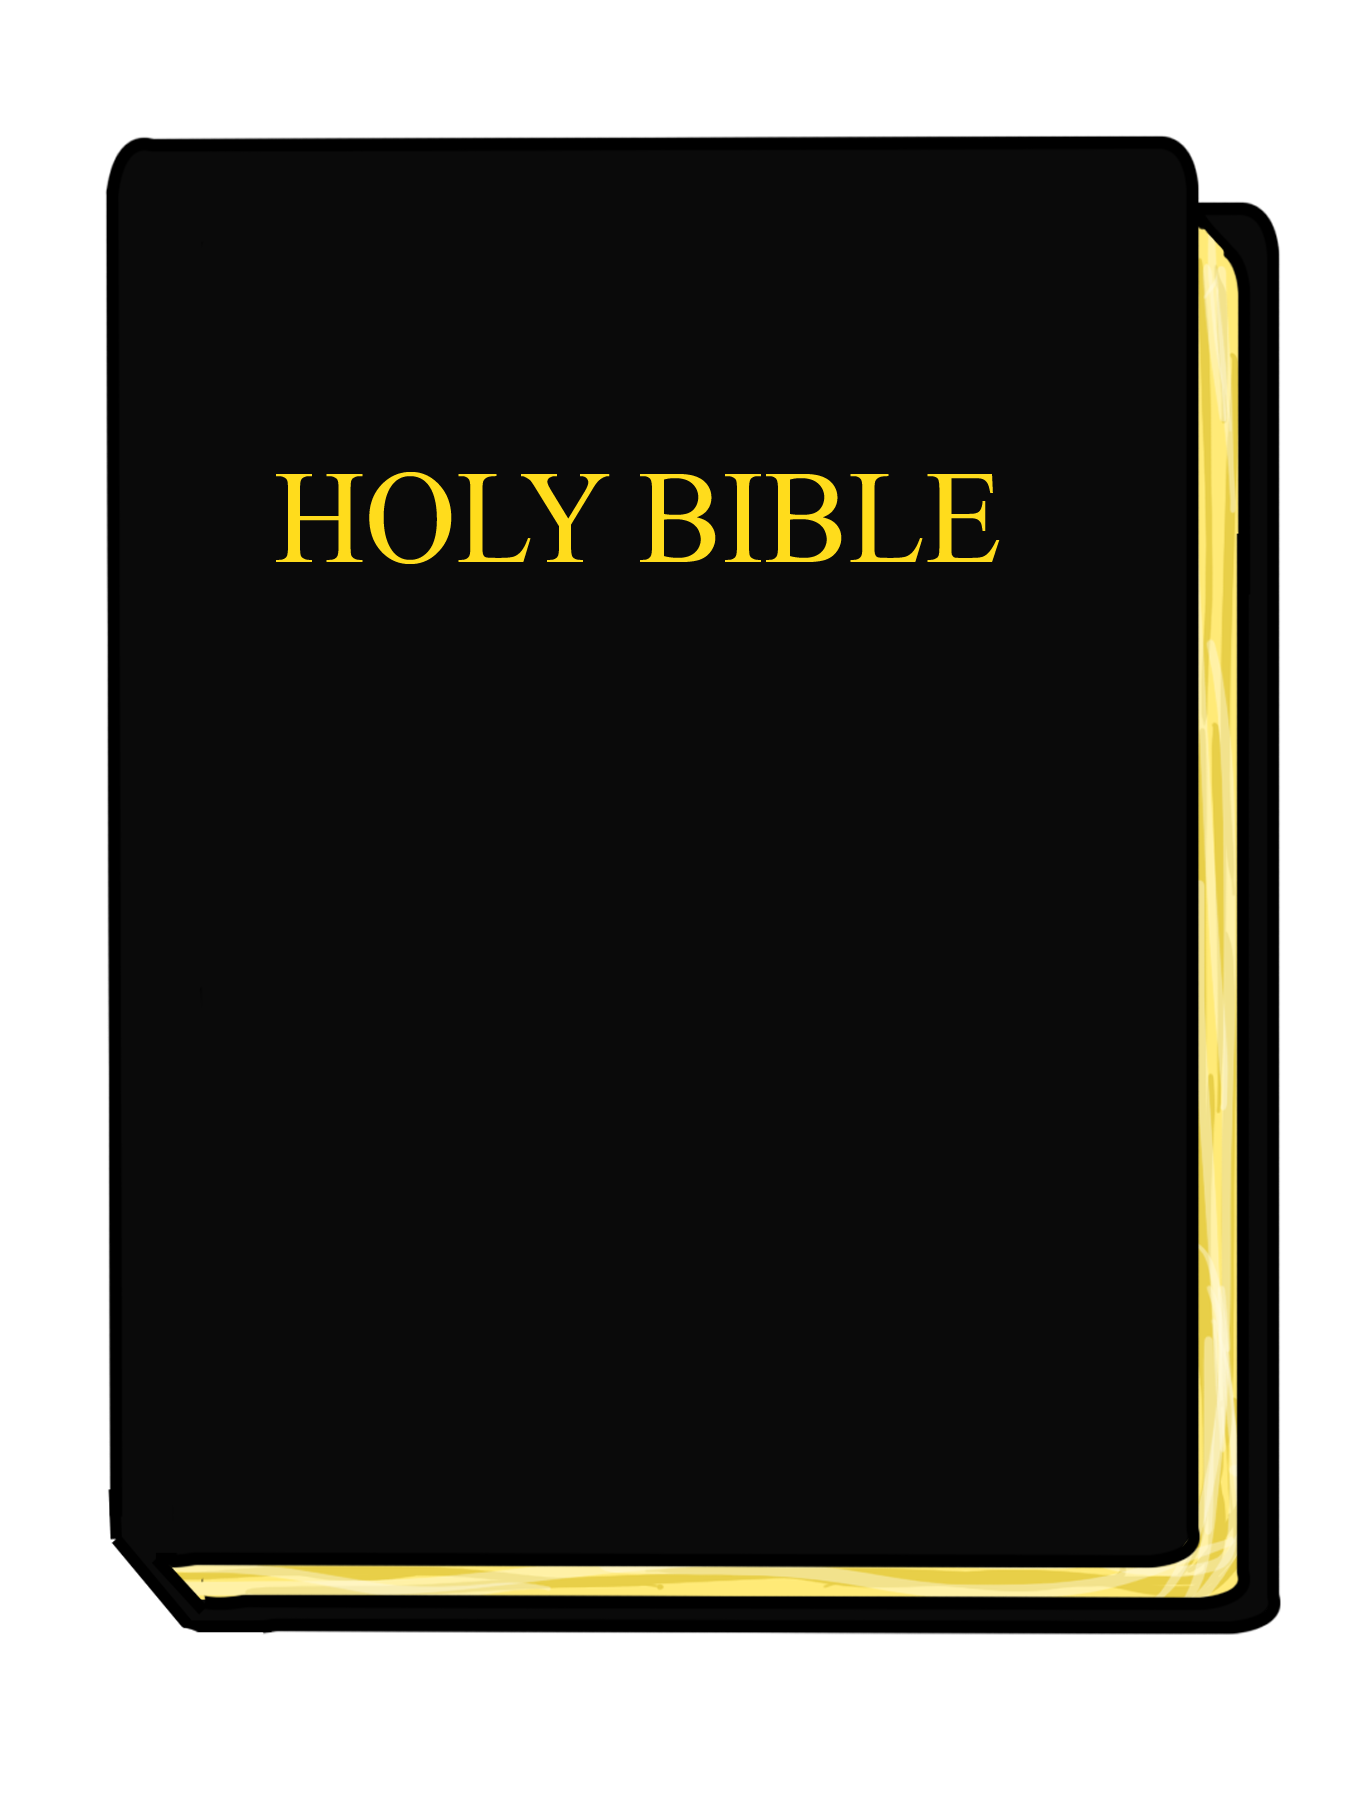 Free to use public. Clipart church bible